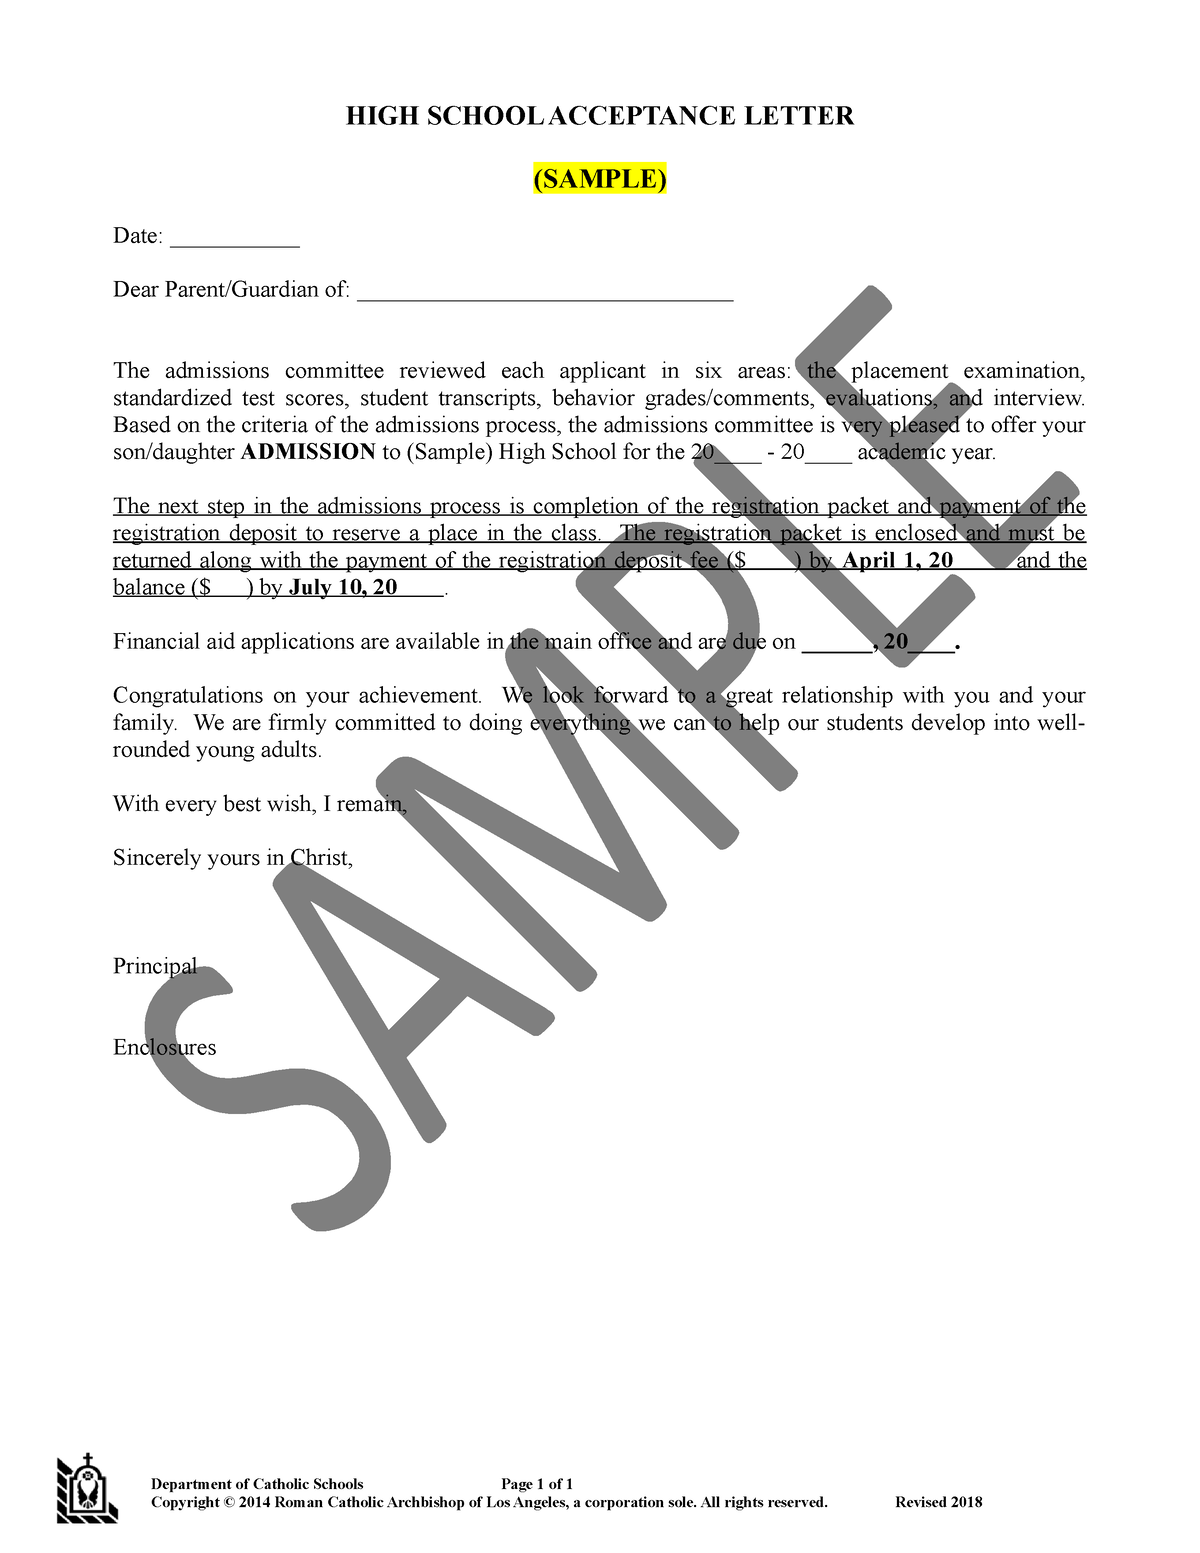 High school acceptance letter sample Department of Catholic Schools